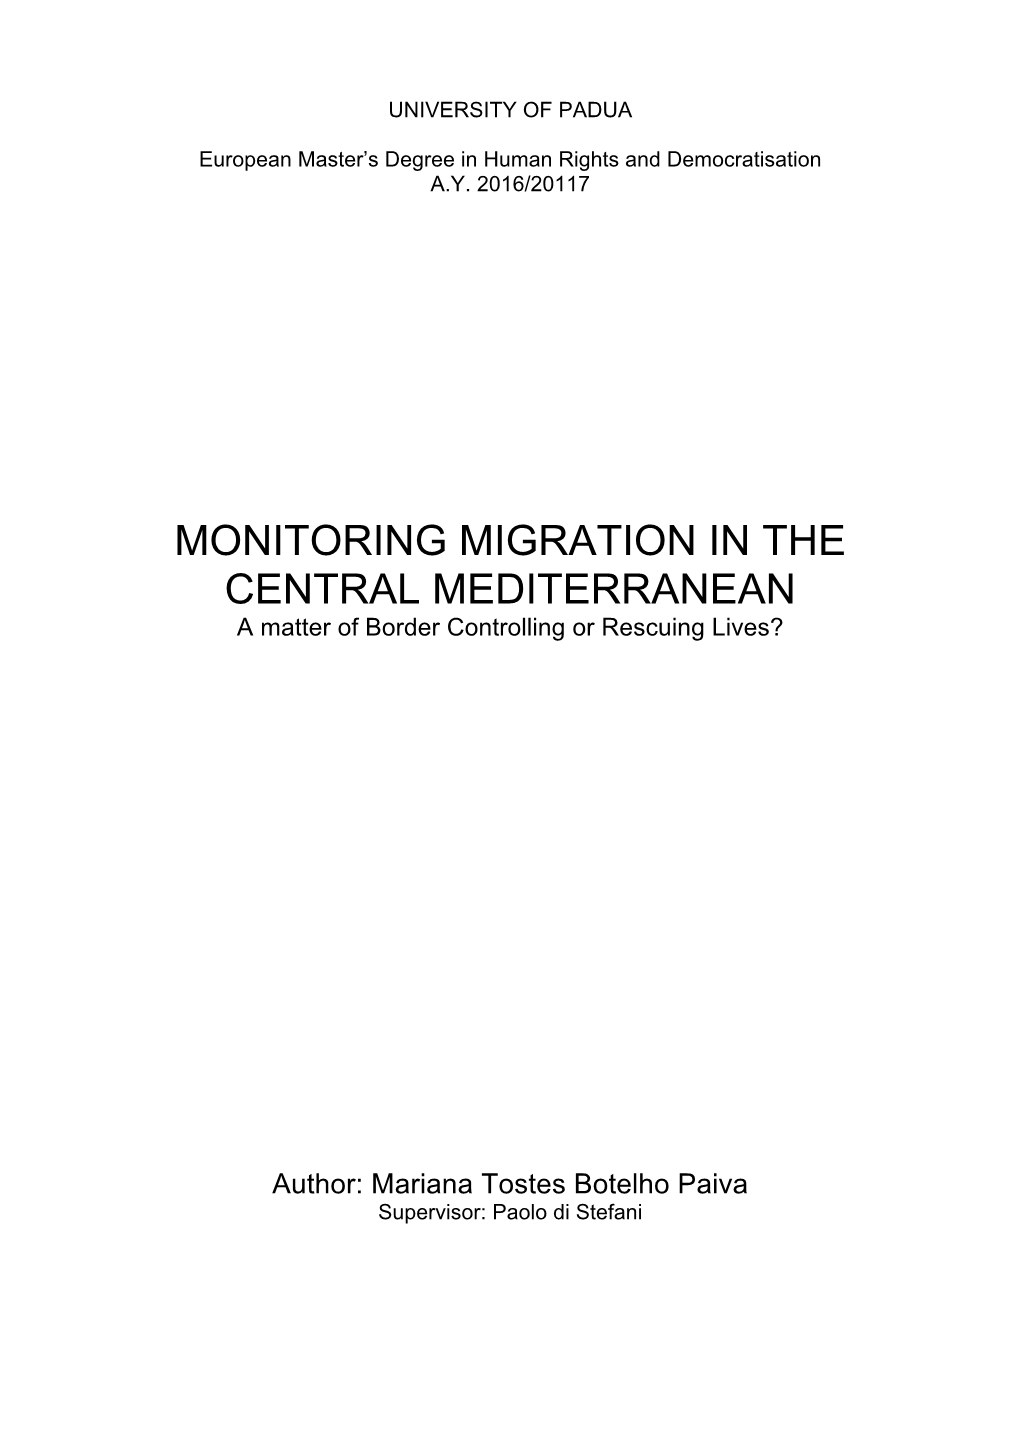 MONITORING MIGRATION in the CENTRAL MEDITERRANEAN a Matter of Border Controlling Or Rescuing Lives?